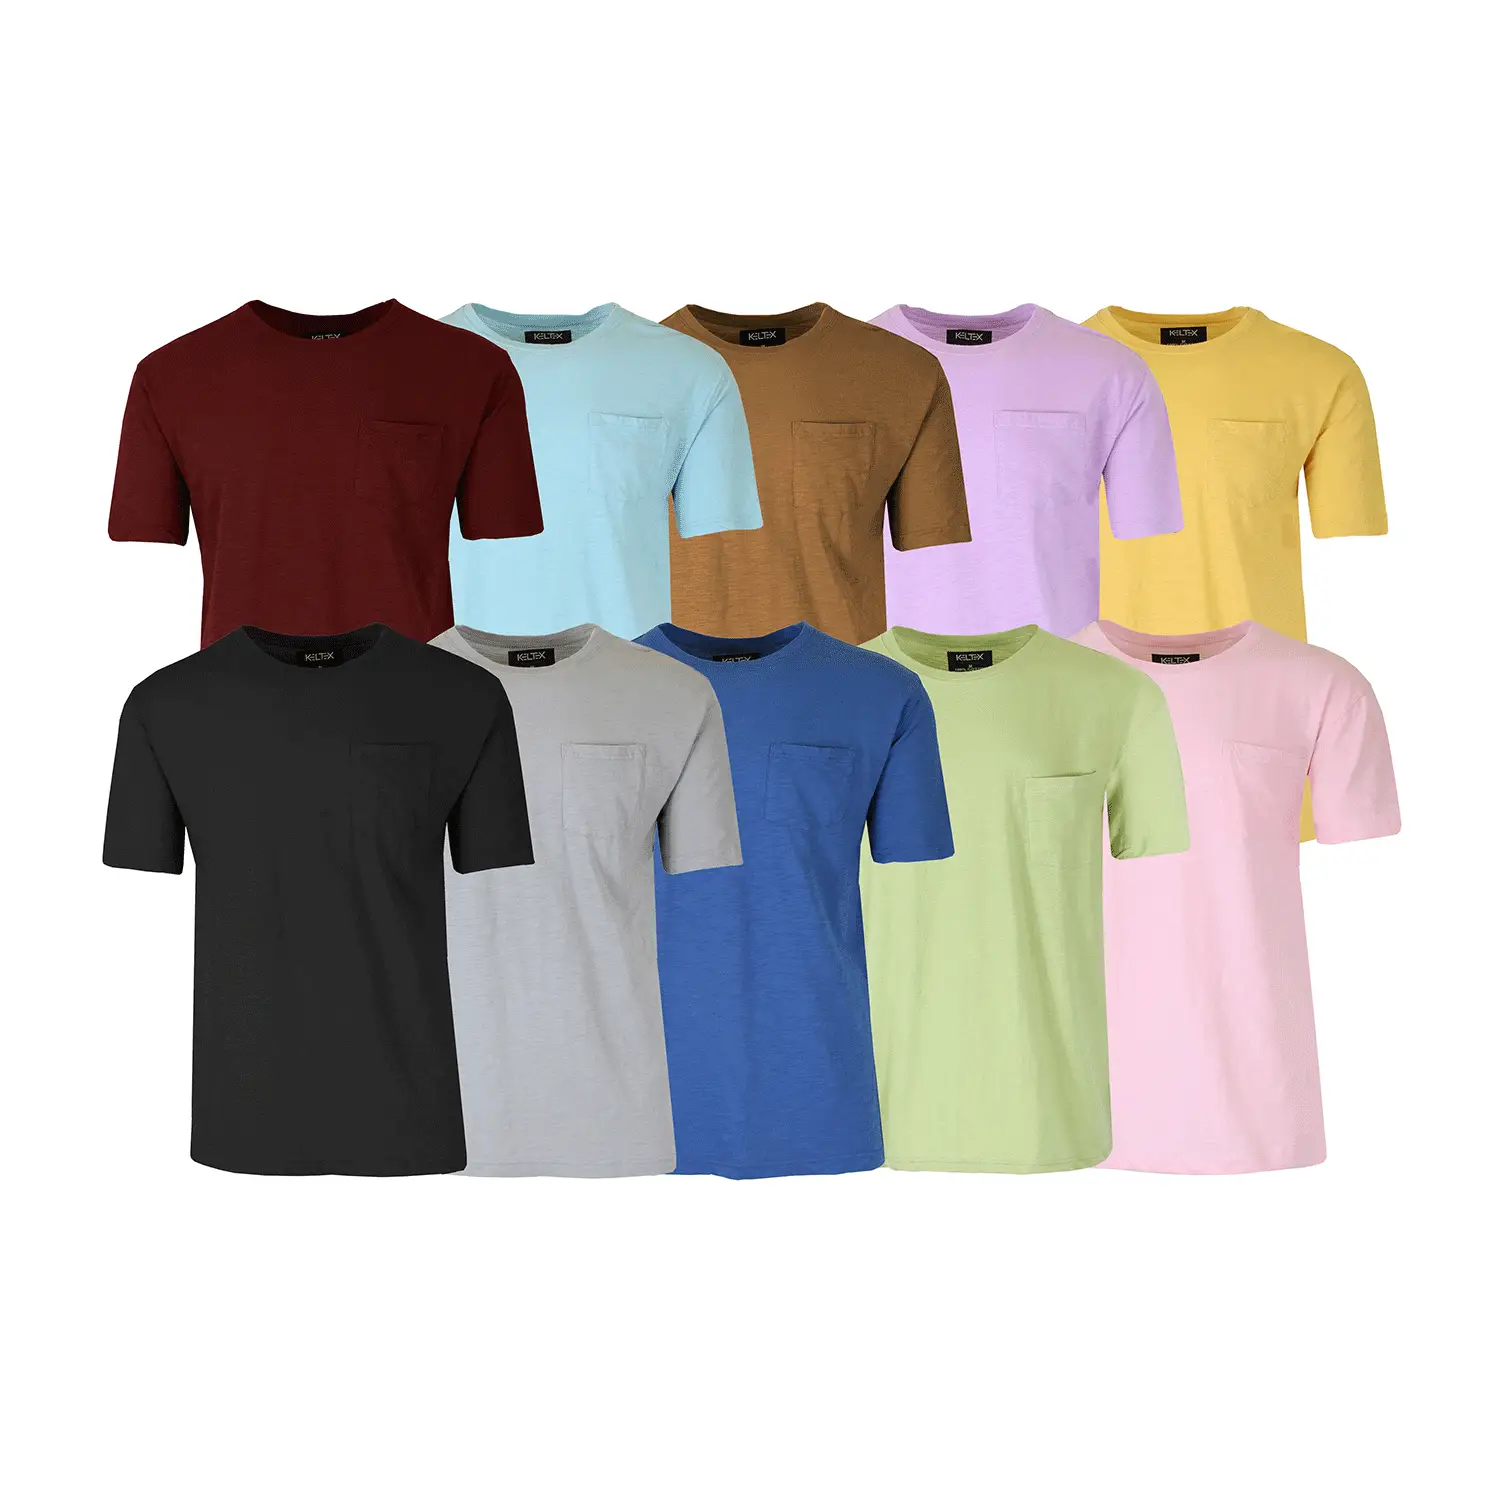 Men's 5-Pack Assorted Short Sleeve Cotton Crew Neck Tee with Chest Pocket